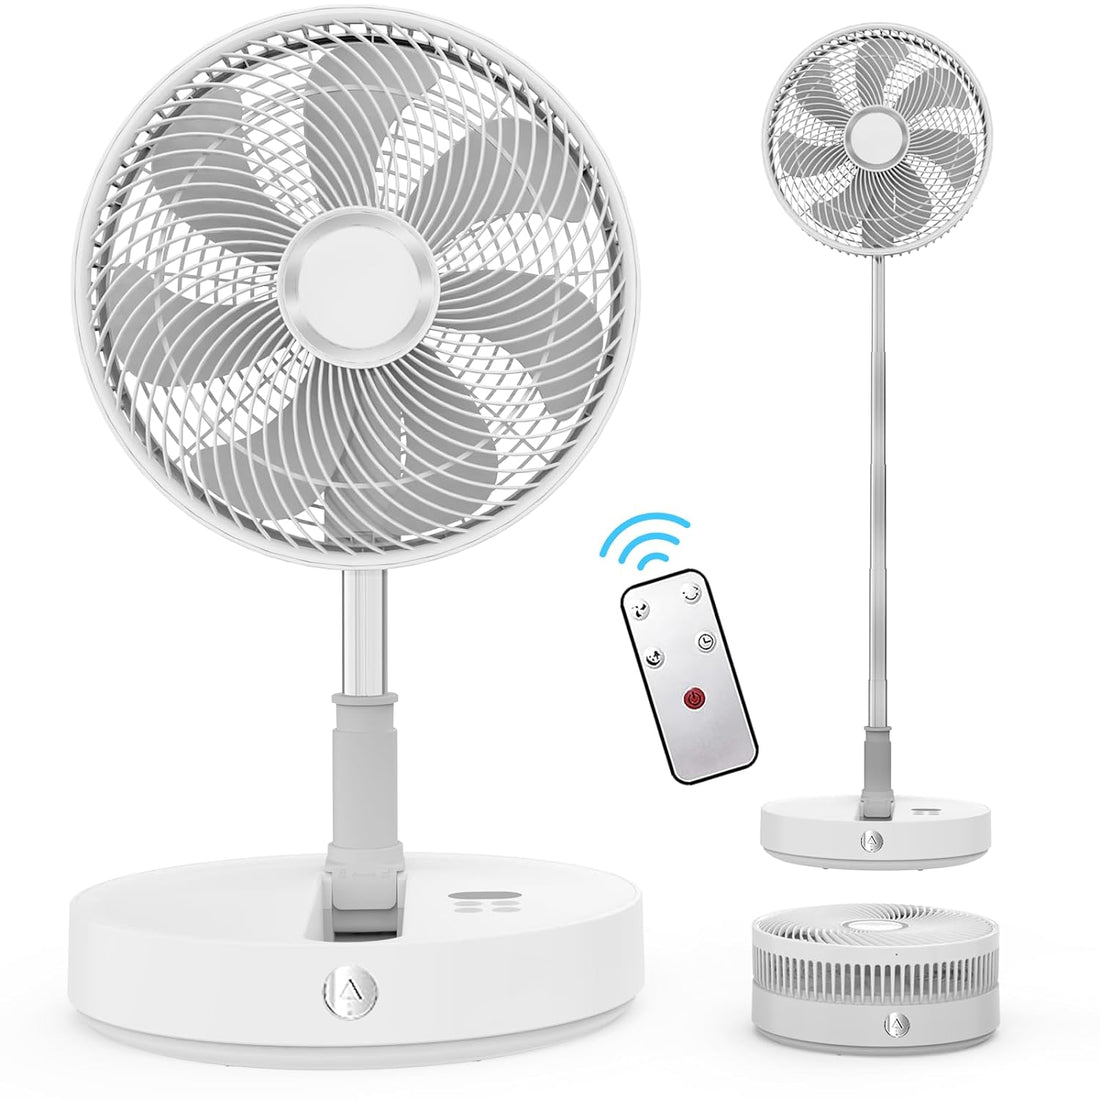 CooCoCo Cooling Fan with Remote Control,12 ” Oscillating Fan,8 Speeds & 9 Timers,Rechargeable Fan,Portable Fan for Travel,Camping,Fishing and Outdoor Use,Ideal Gift for Him,Her,Men,Women,White